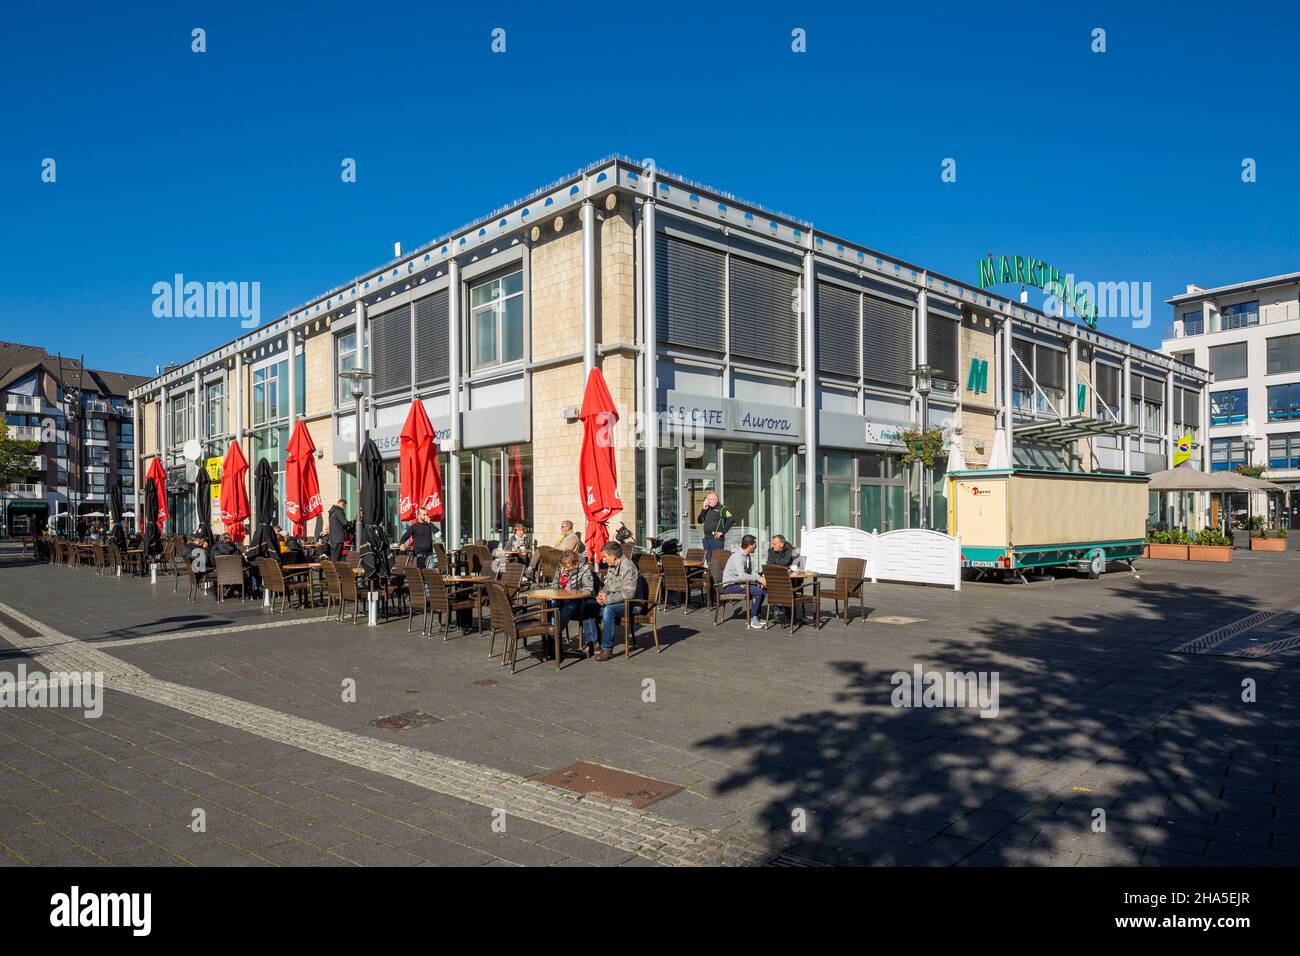 germany,langenfeld (rhineland),bergisches land,niederbergisches land,niederberg,rhineland,north rhine-westphalia,north rhine-westphalia,langenfeld-immigrath,markthalle shopping center on the market square,people sitting in the street cafe Stock Photo